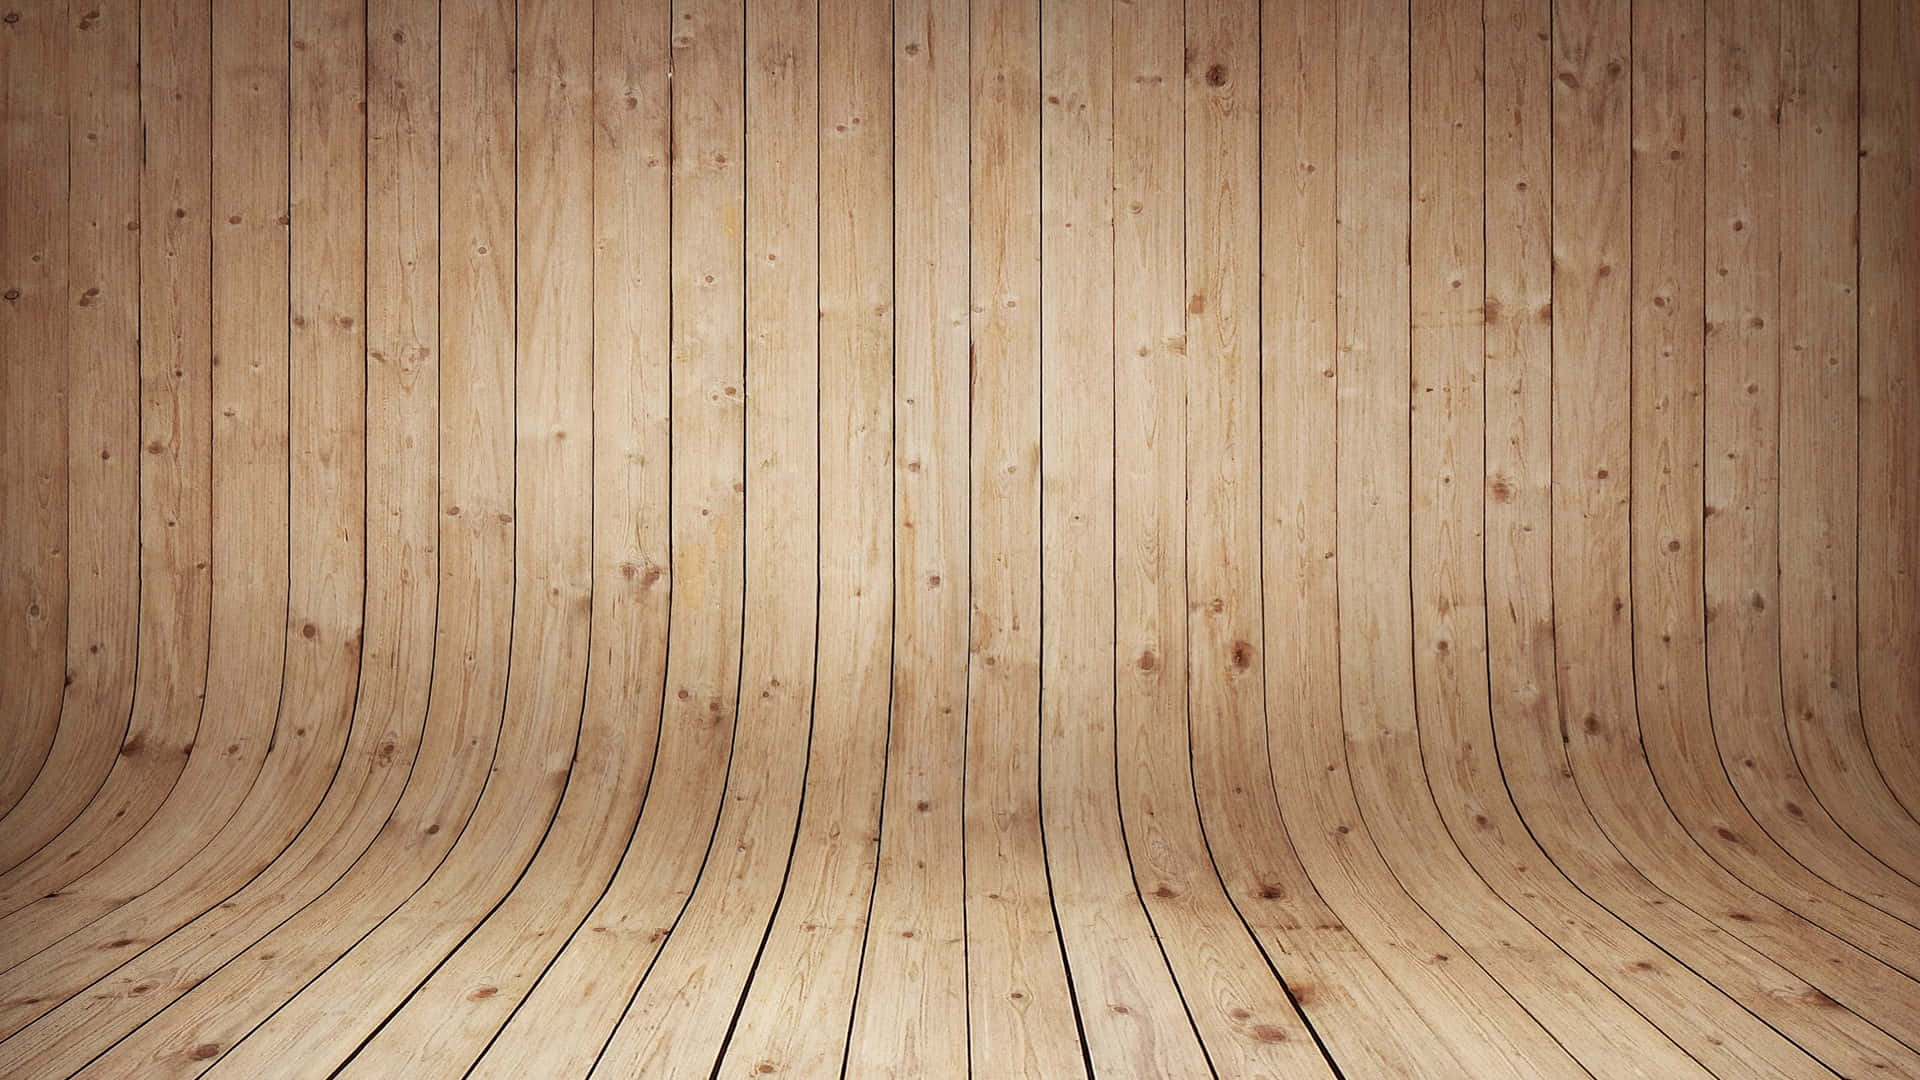 Wooden Table Curving Downwards Background